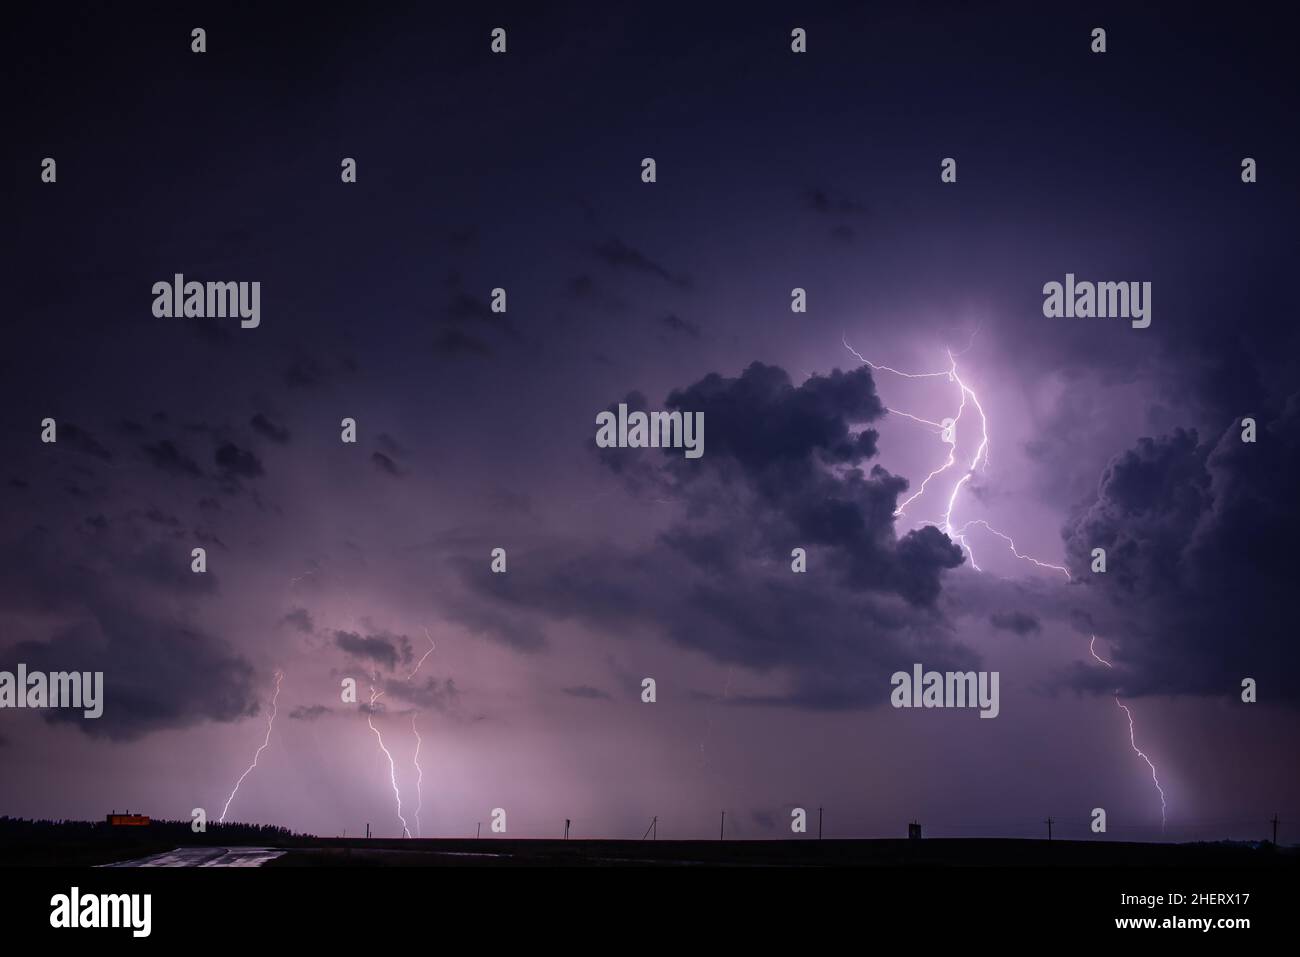 Lightning bolt strike from a thunderstorm with storm clouds Stock Photo